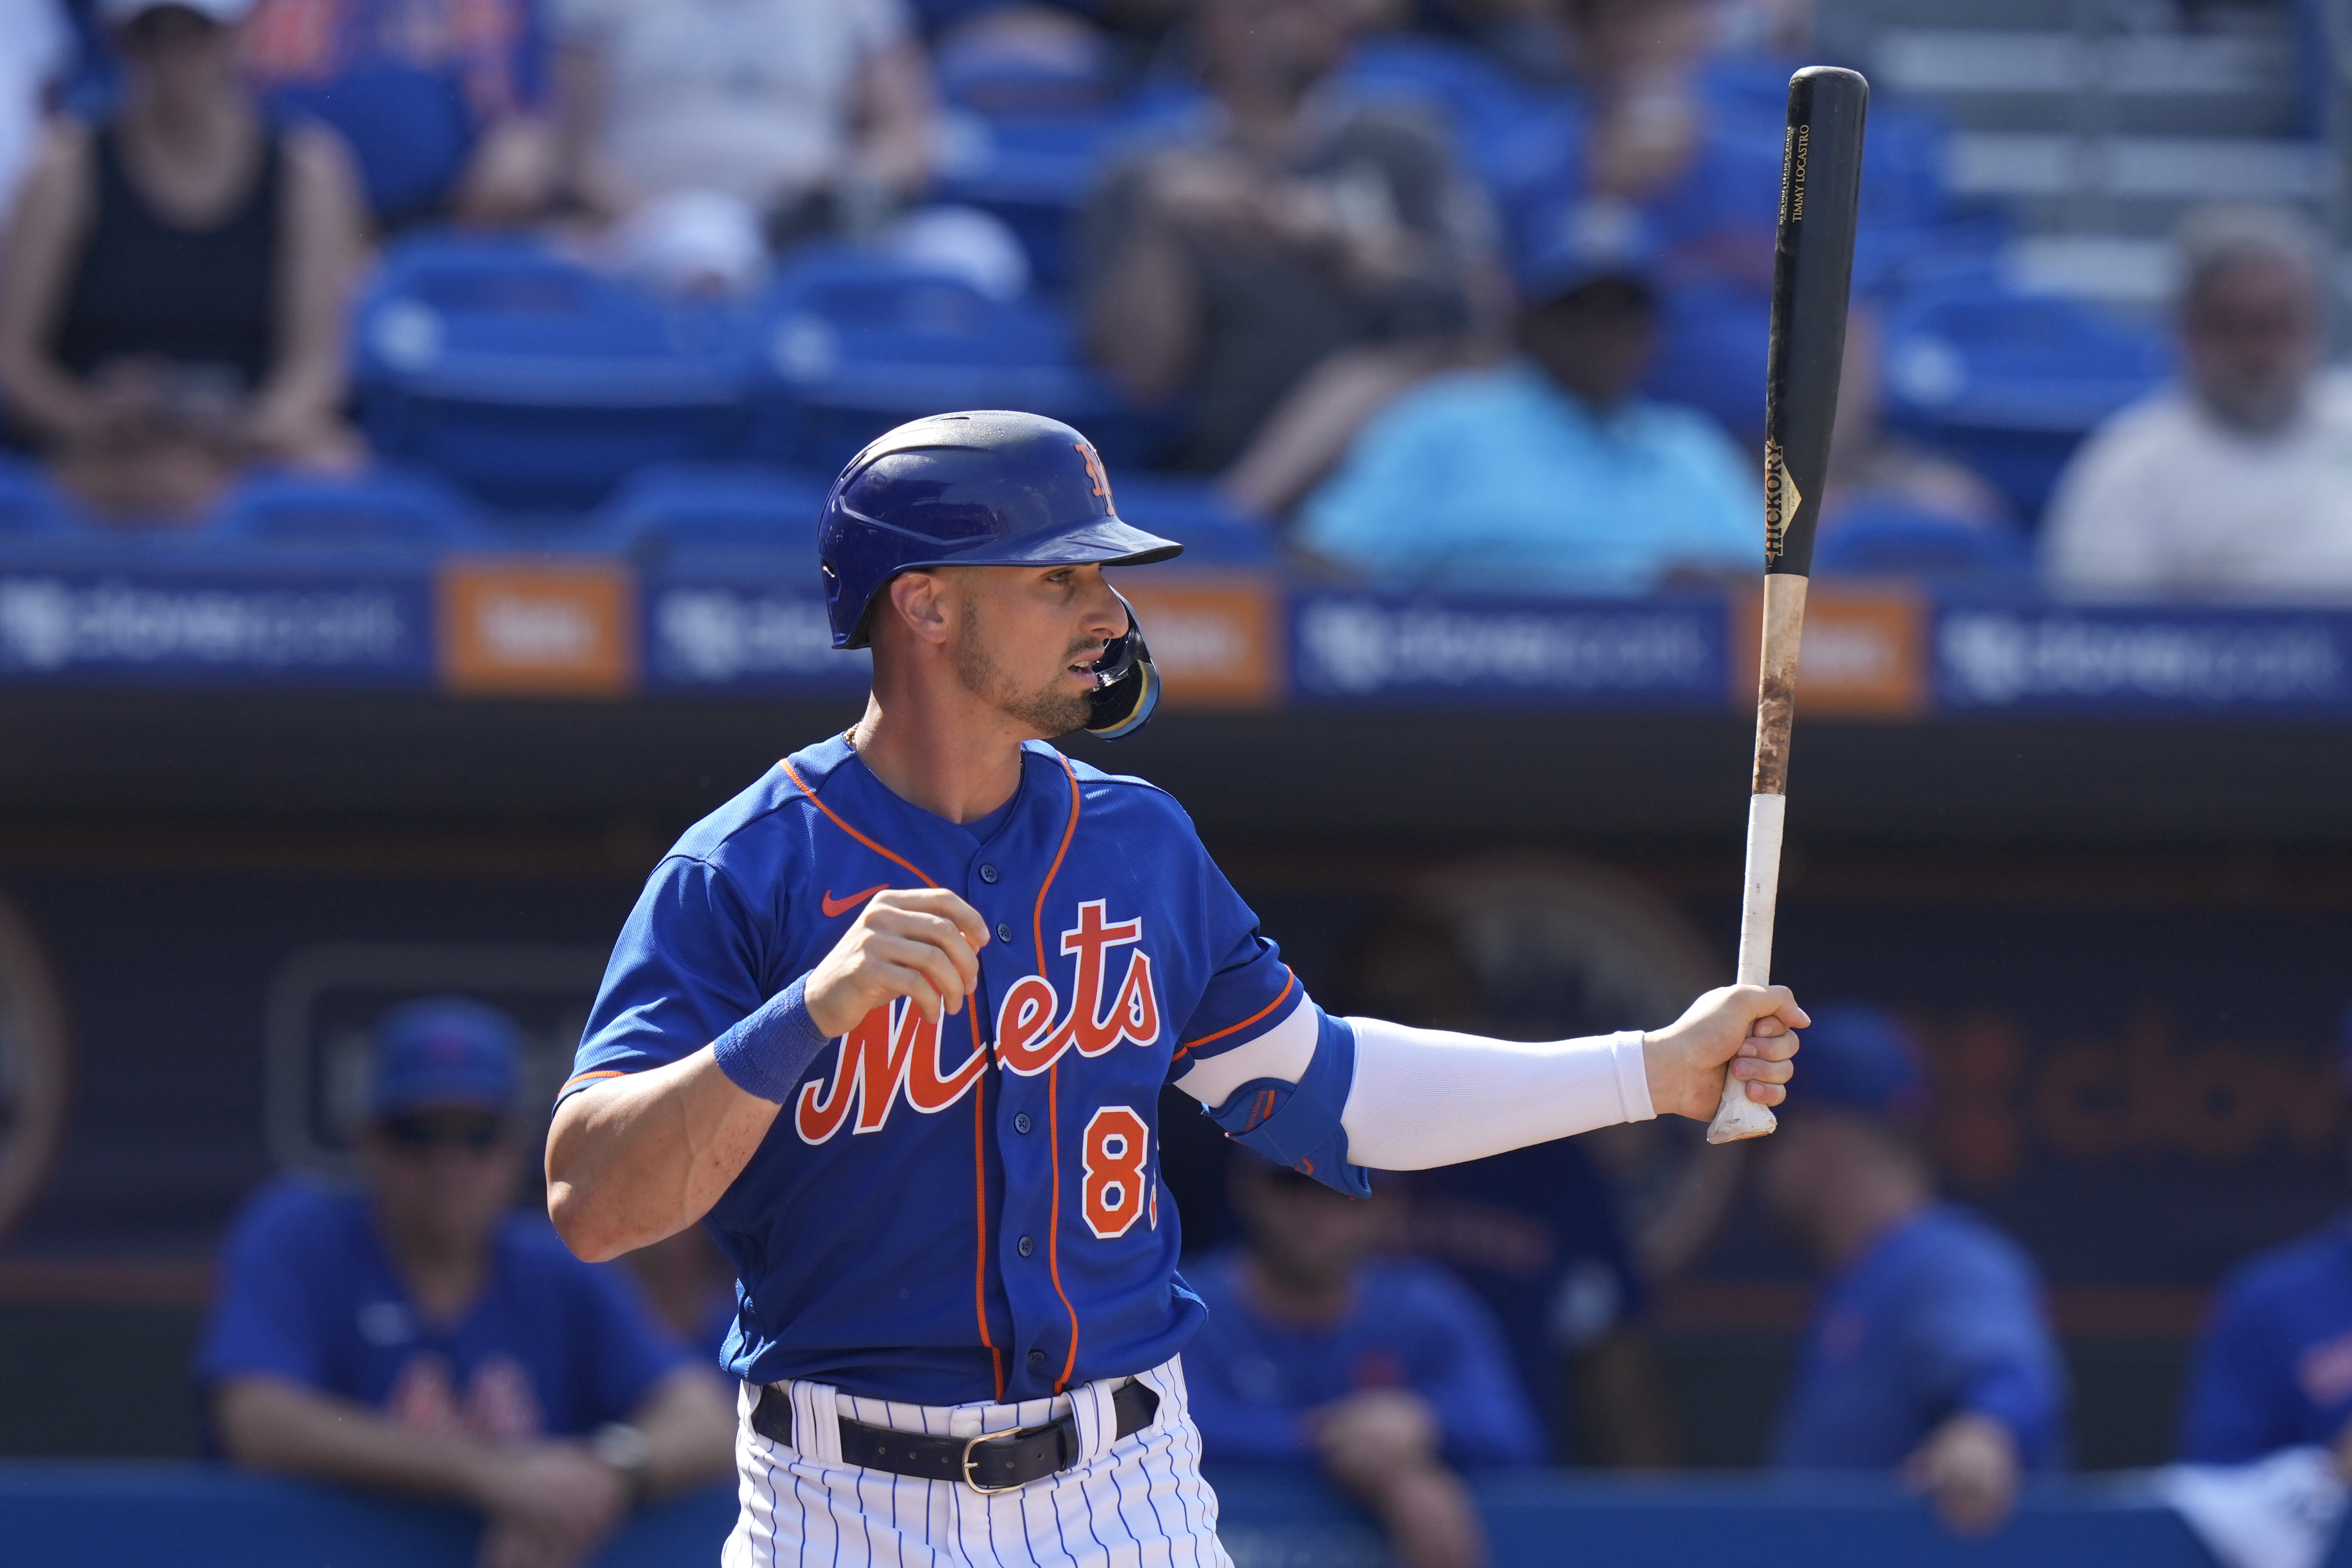 New York Yankees, NY Mets announce lineups for Game 1 Tuesday